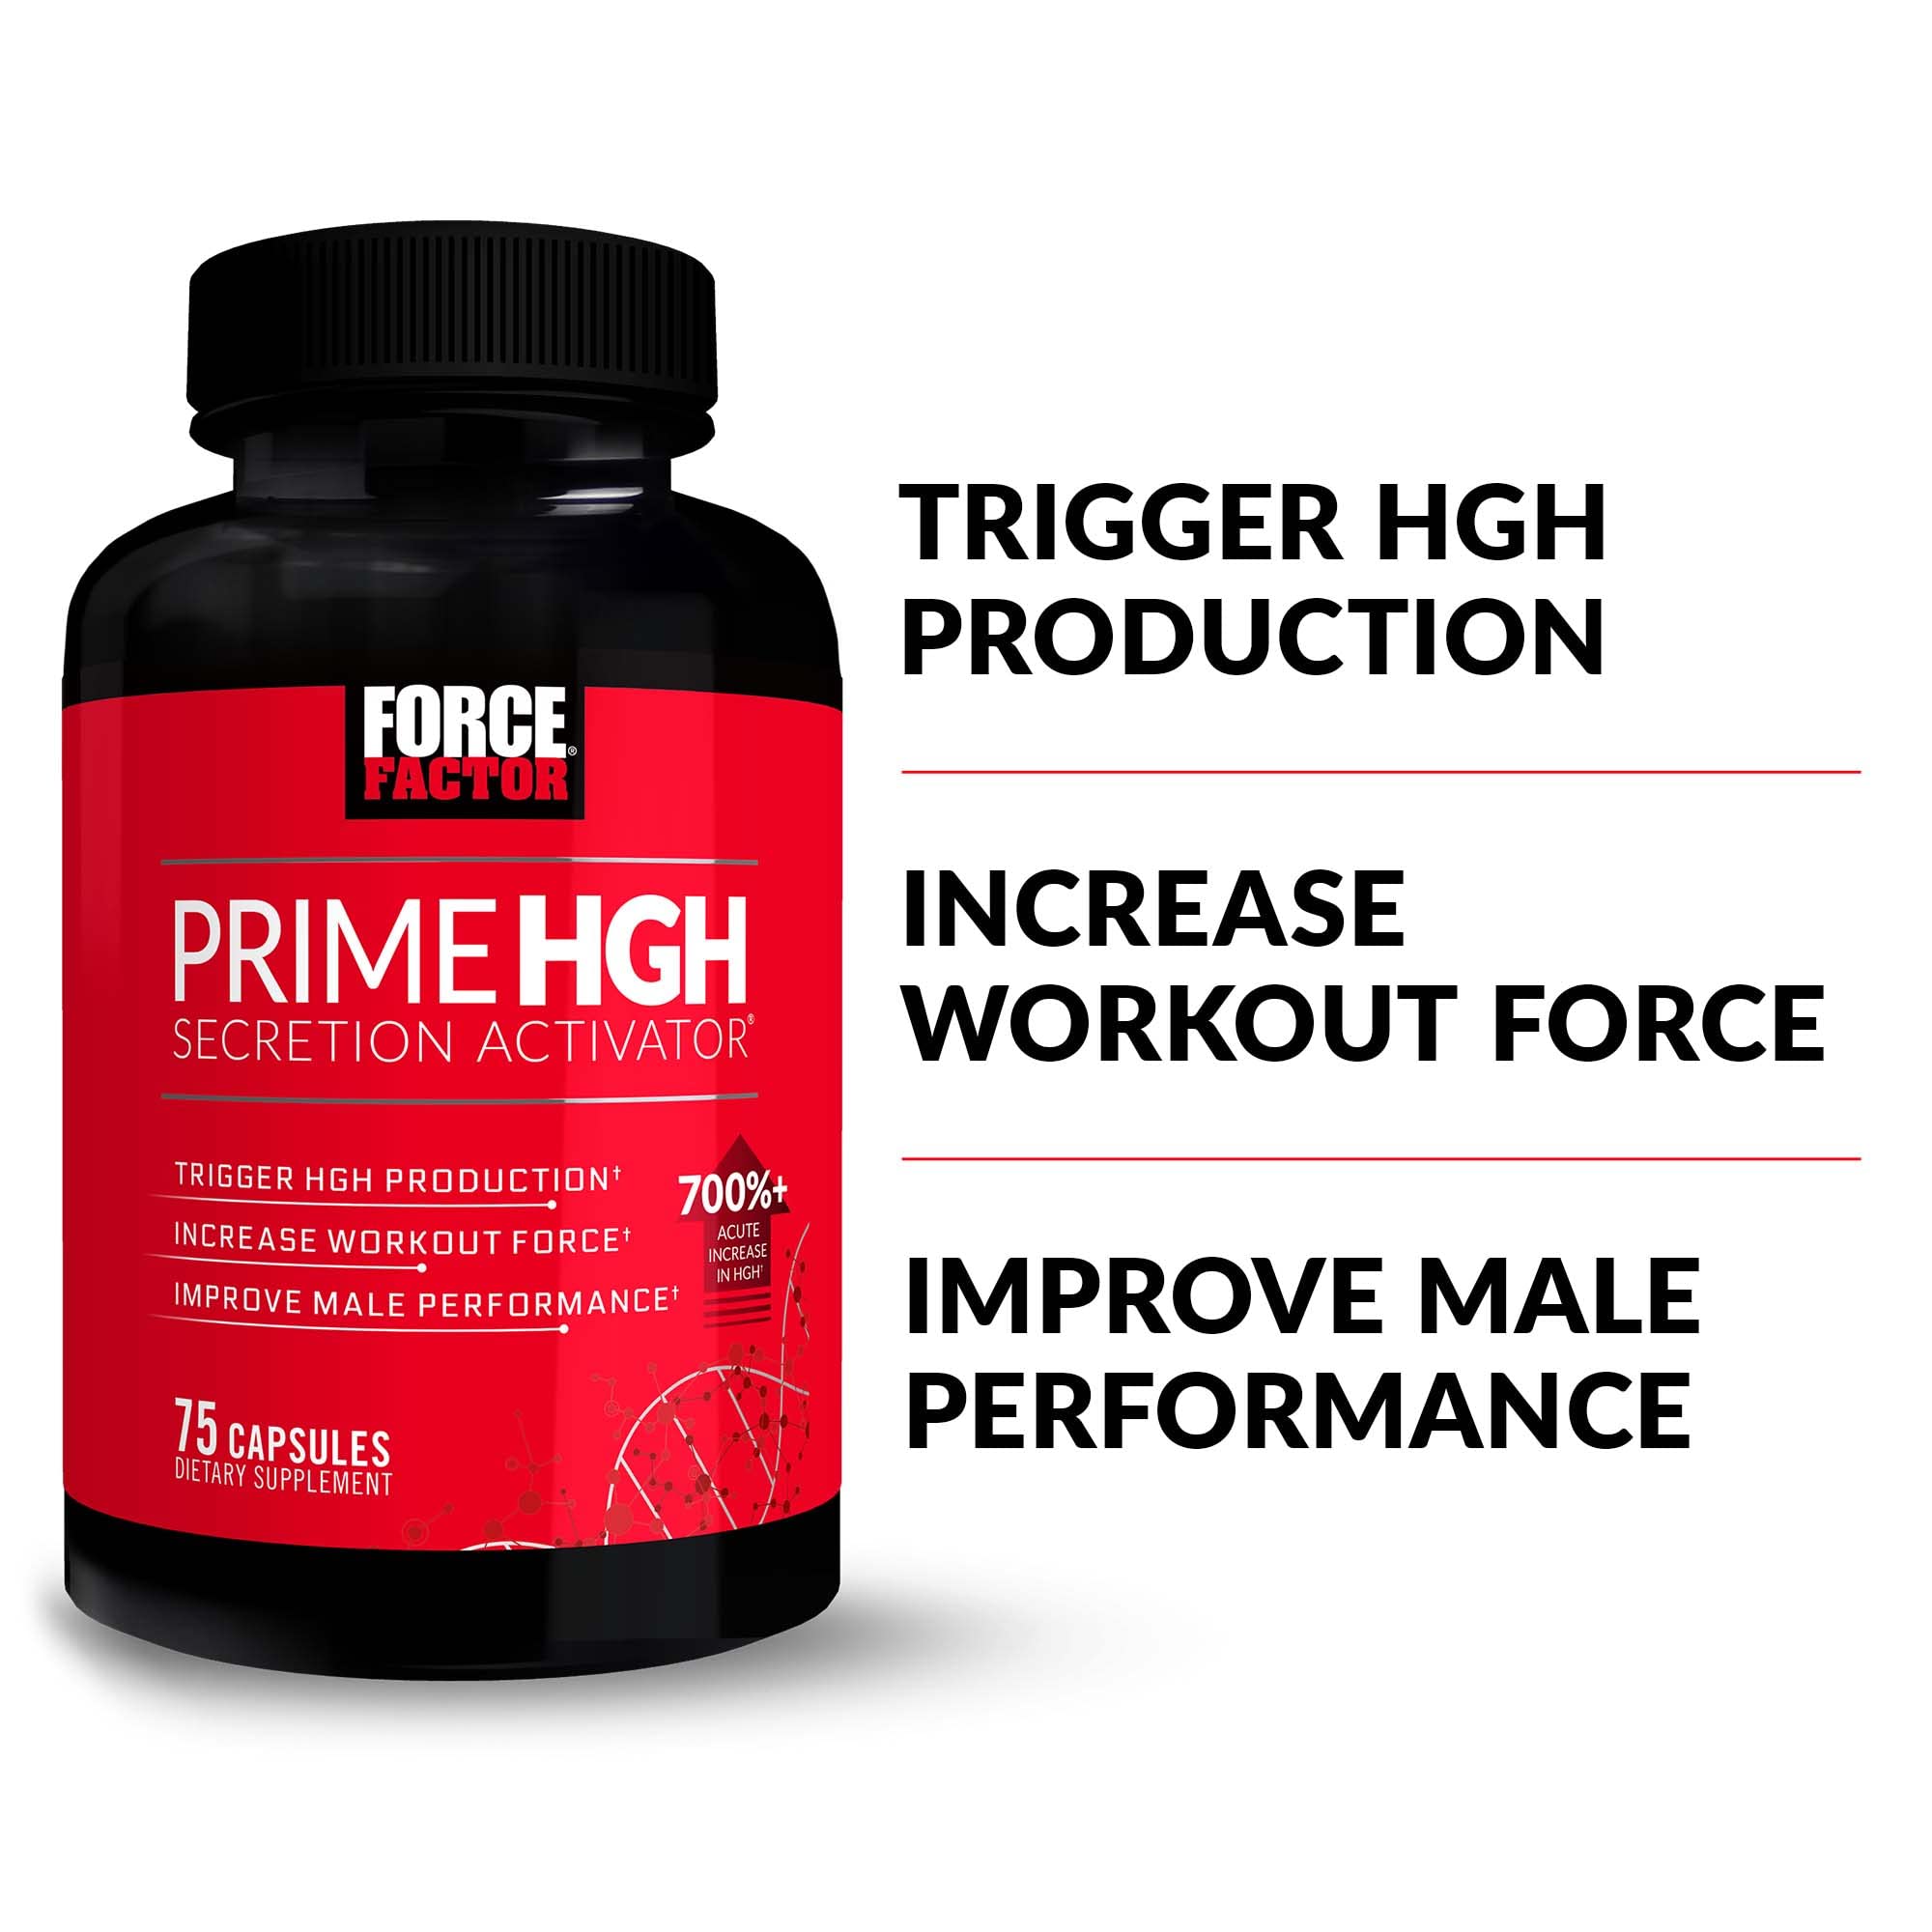 Force Factor Prime HGH Secretion Activator, 3-Pack, HGH Supplement for Men with Clinically Studied AlphaSize to Help Trigger HGH Production, Increase Workout Force, & Improve Performance, 225 Count